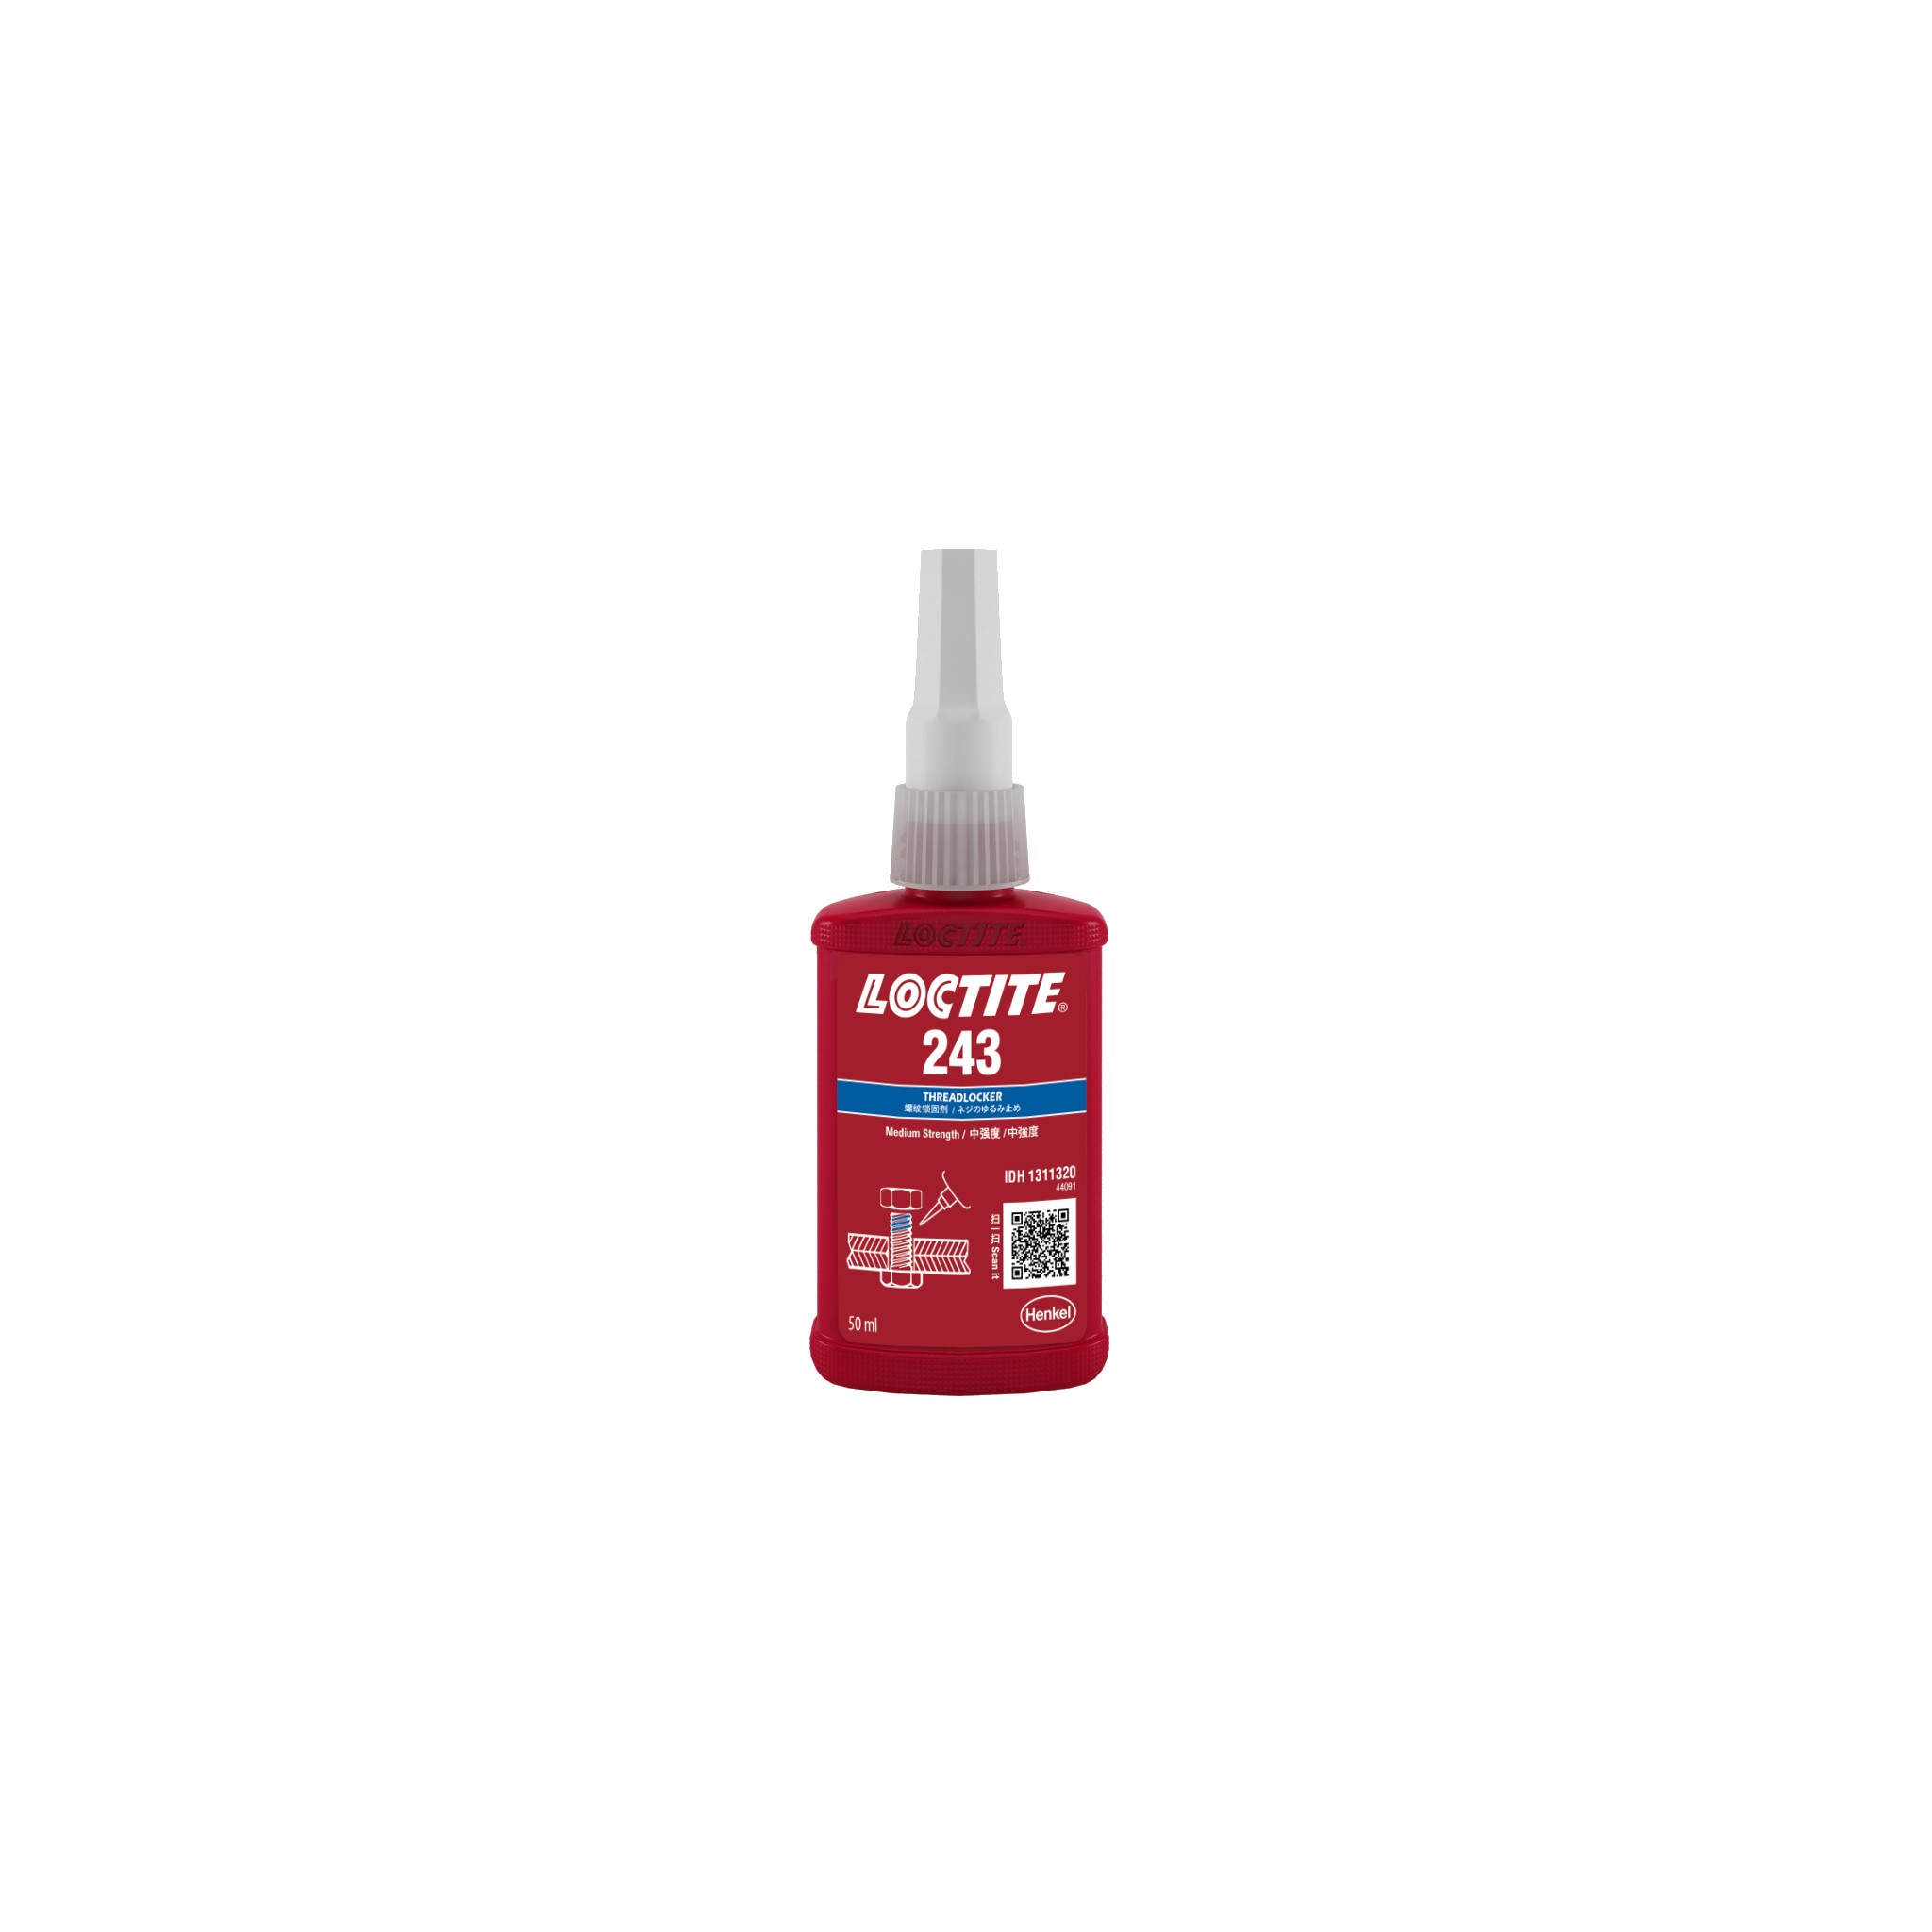 LOCTITE™ Metal Adhesive Specifications